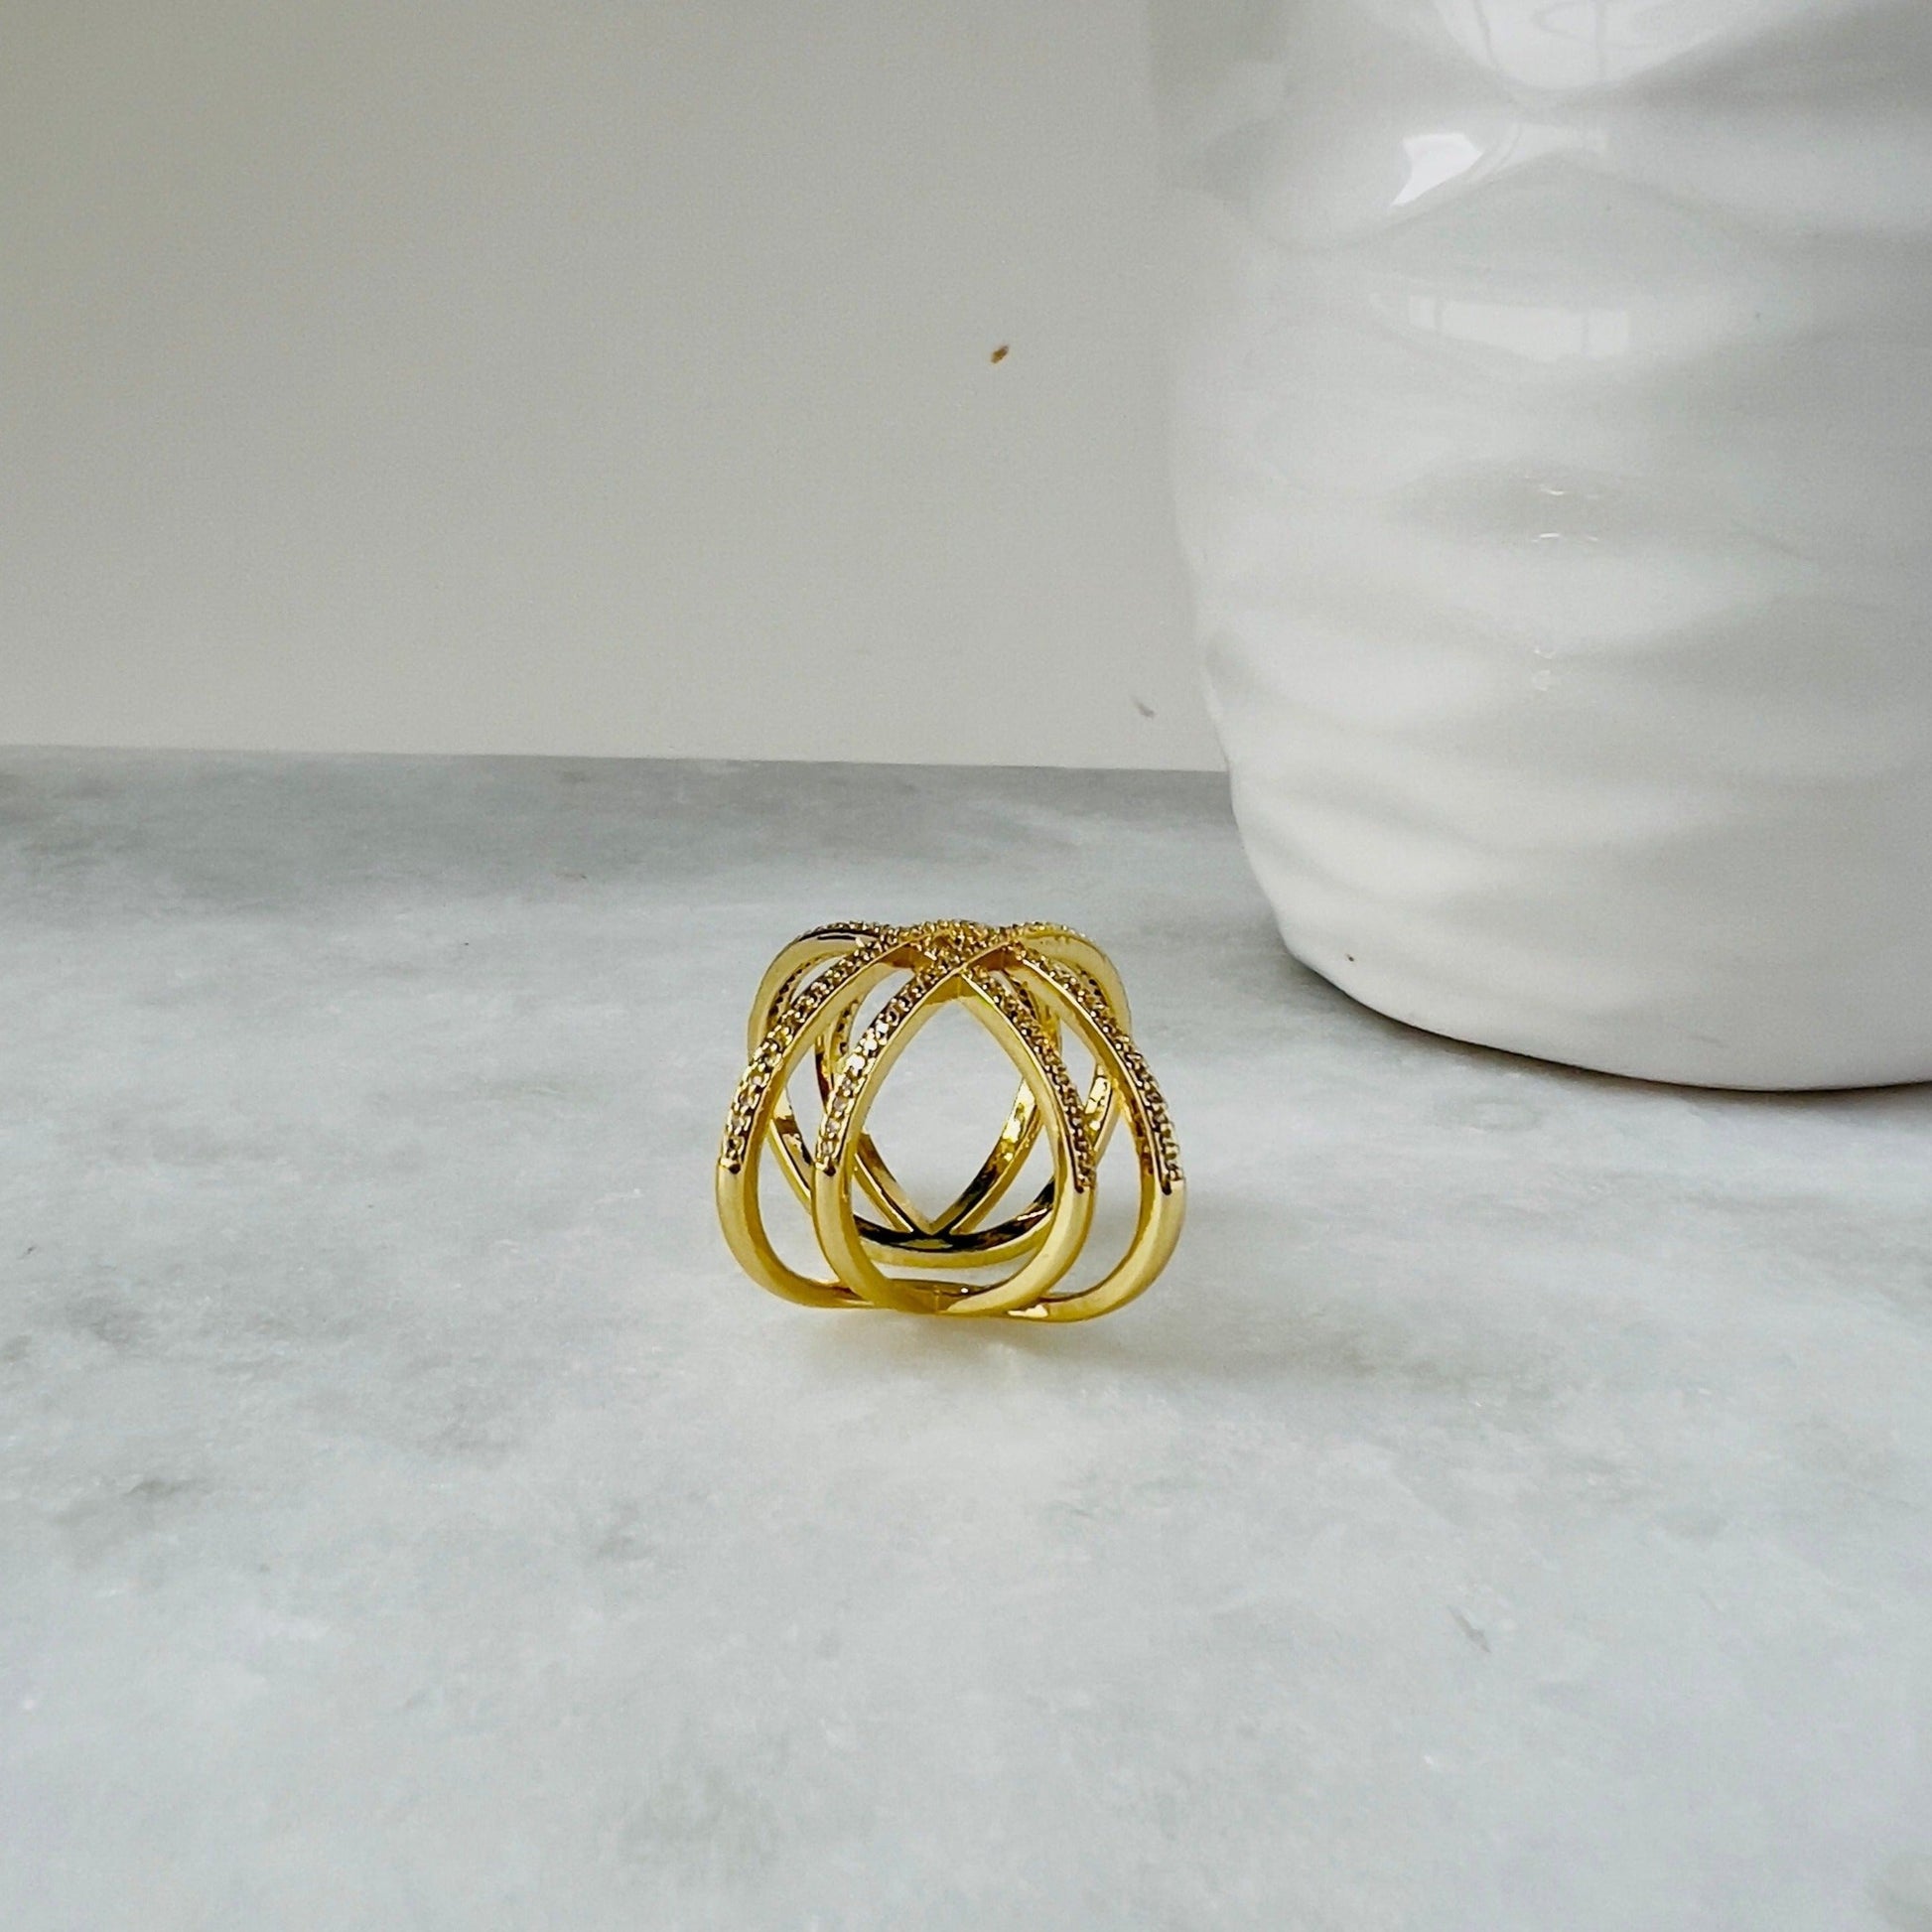 Enhance your outfit with our gold-plated ring, featuring sparkling zirconia. Bold and elegant, it's the perfect statement accessory. Perfect gift for a girlfriend